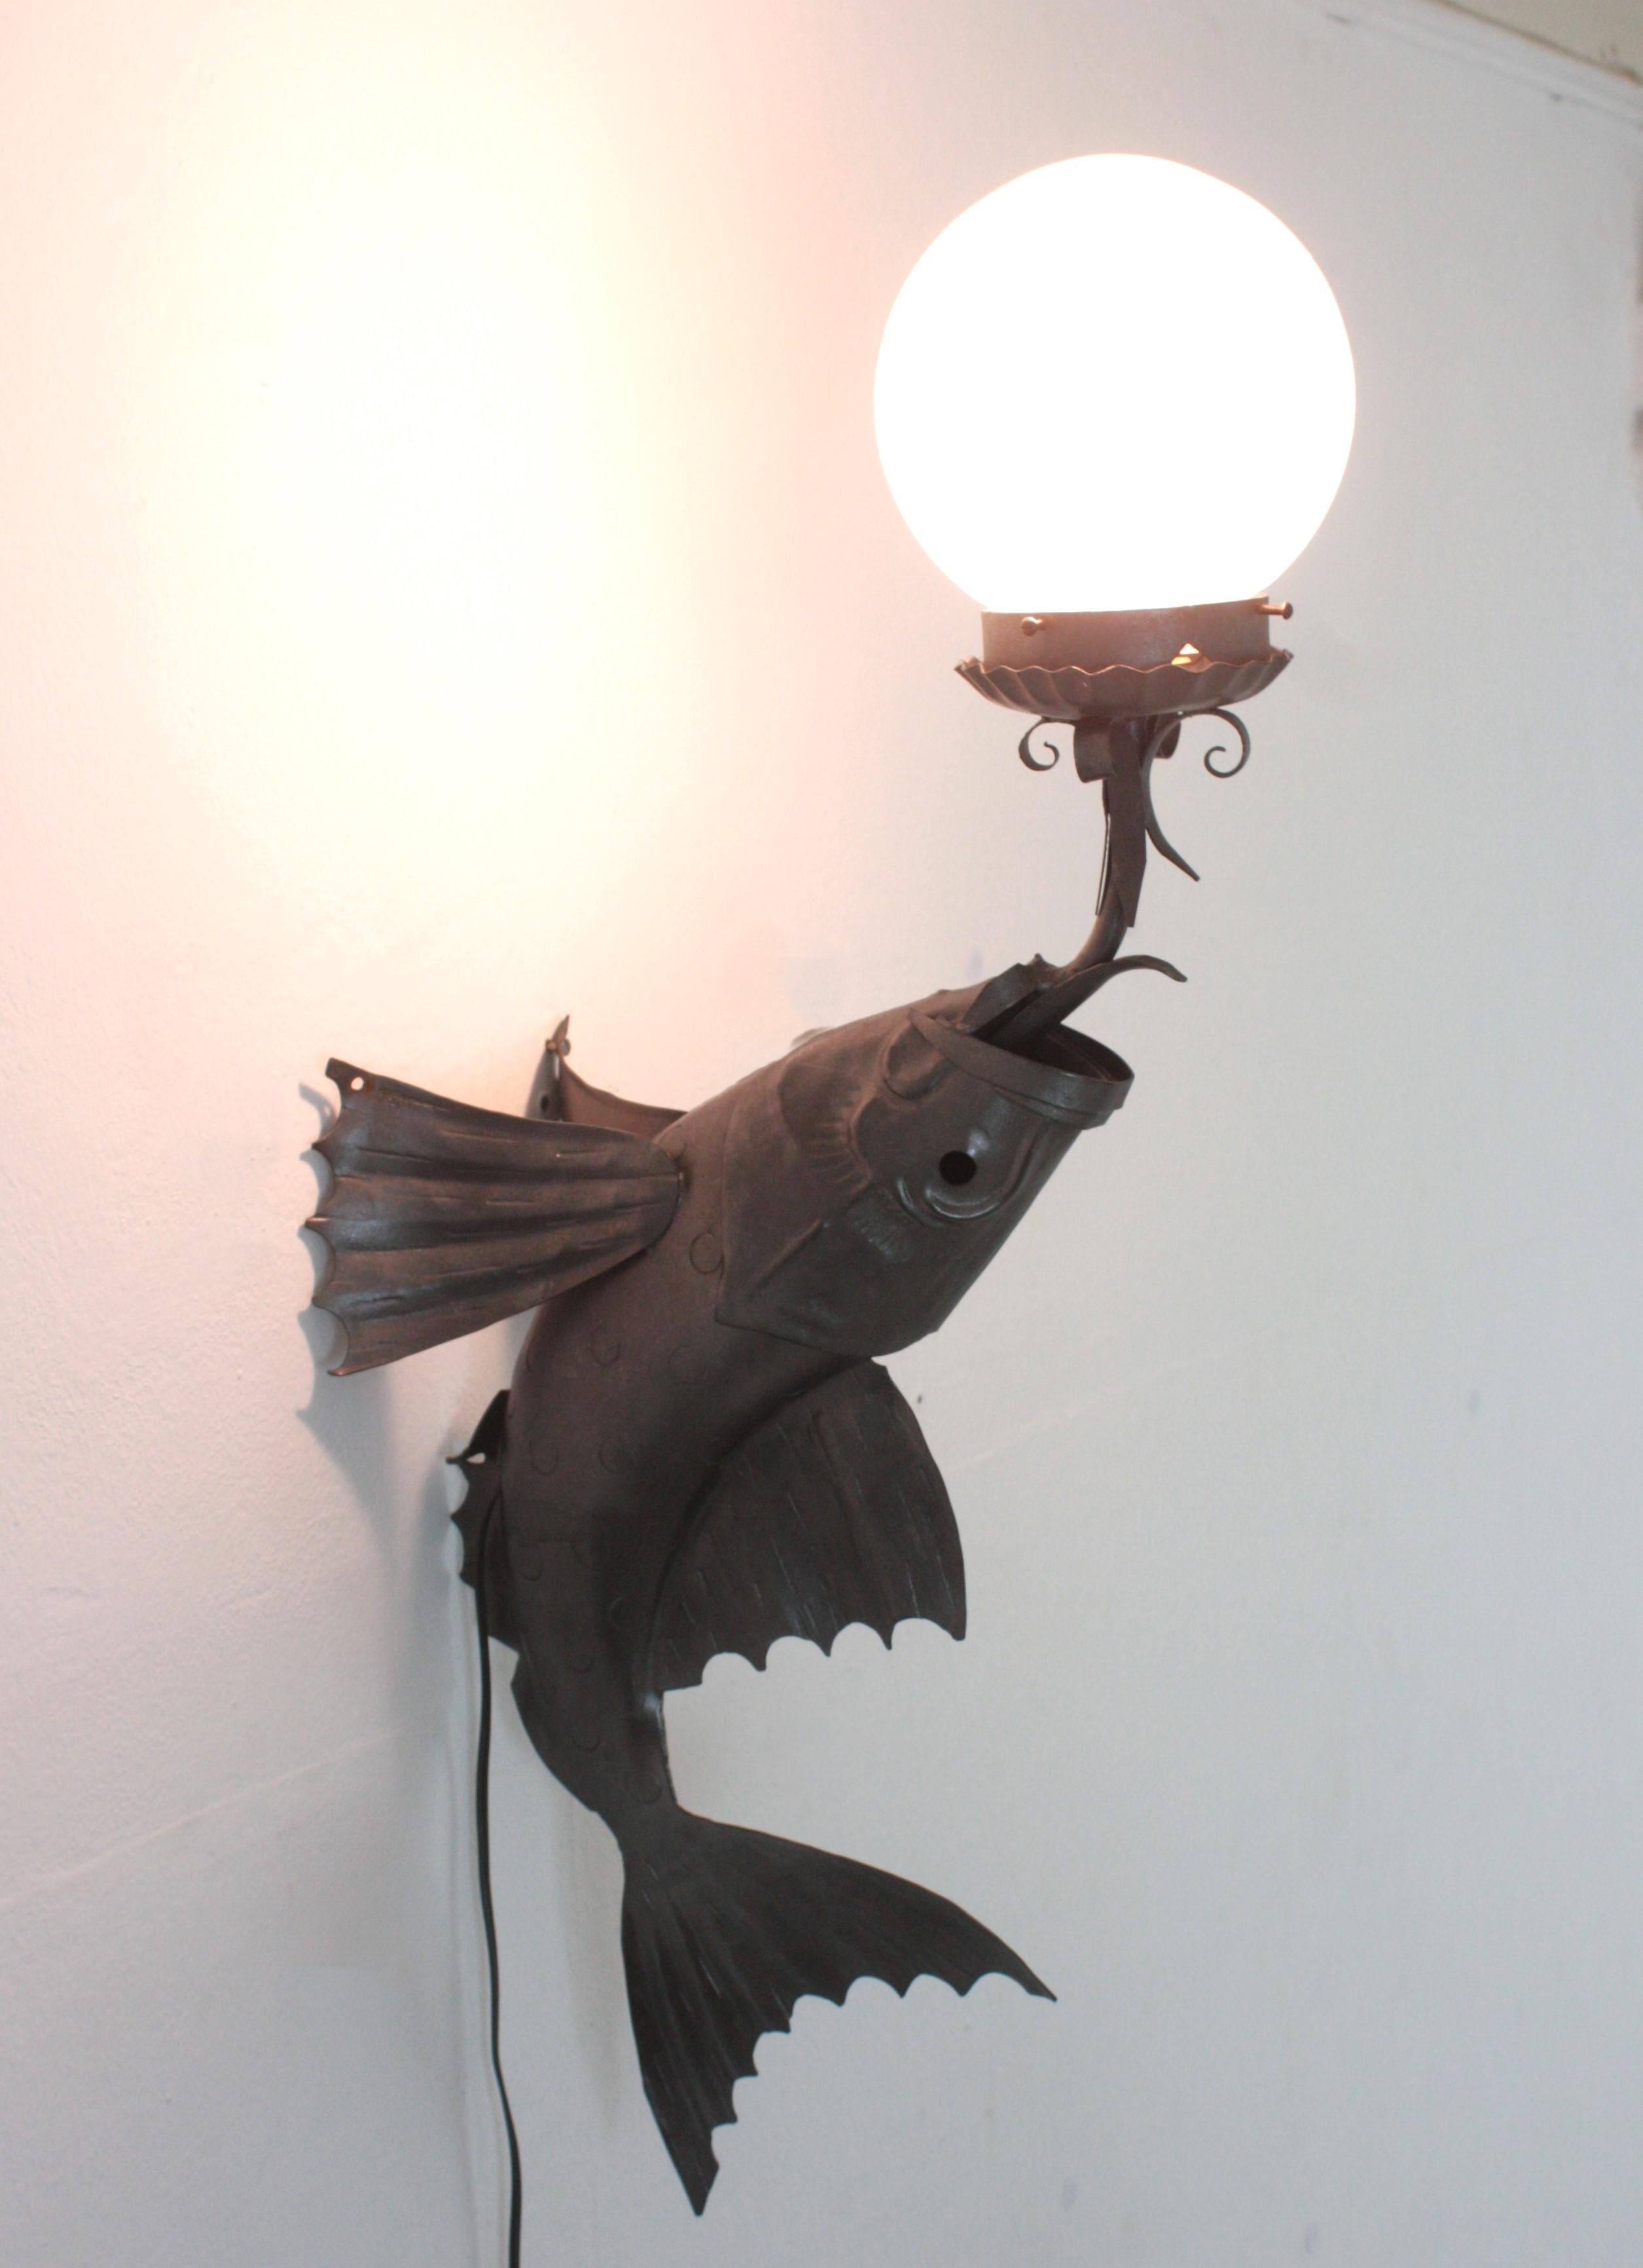 Wrought Iron Fishe Wall Light with Frosted Glass Globe Shade. Spain, 1950s-1960s
Rare find.
This single light wall sconce was handcrafted in Spain at the Mid-Century Modern period in the style of Brutalism. 
It features a large iron fish blowing